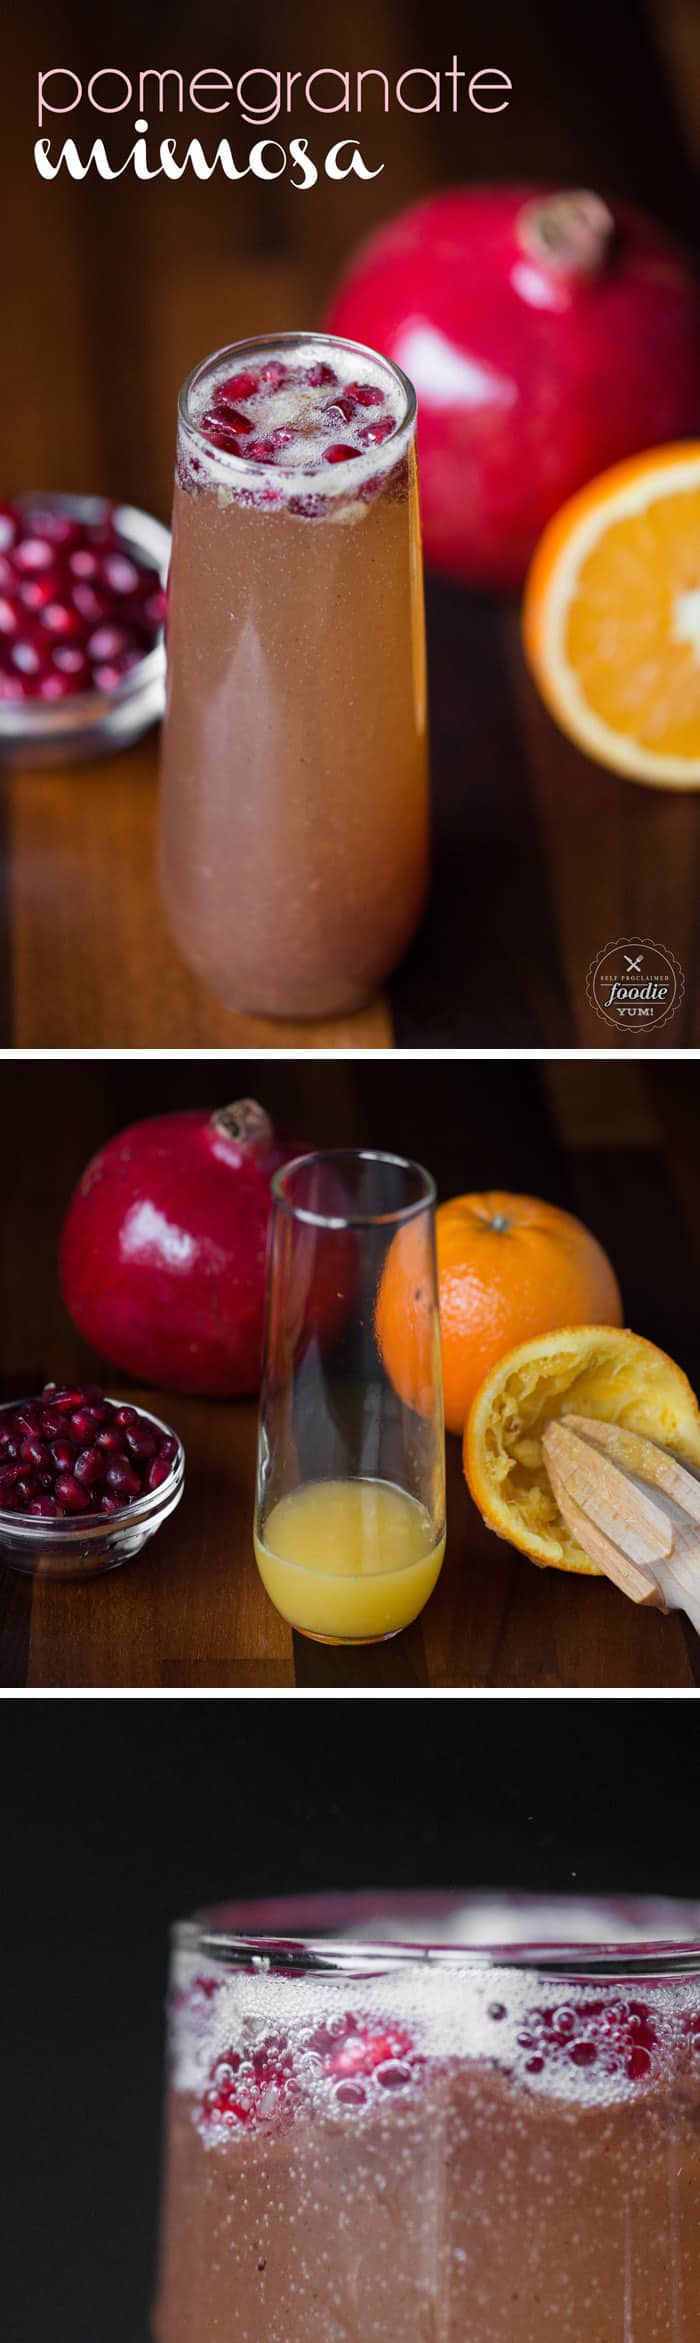 For your next winter celebration, enjoy a tasty Pomegranate Mimosa cocktail, made with pomegranate and orange juice, champagne, and a secret ingredient!